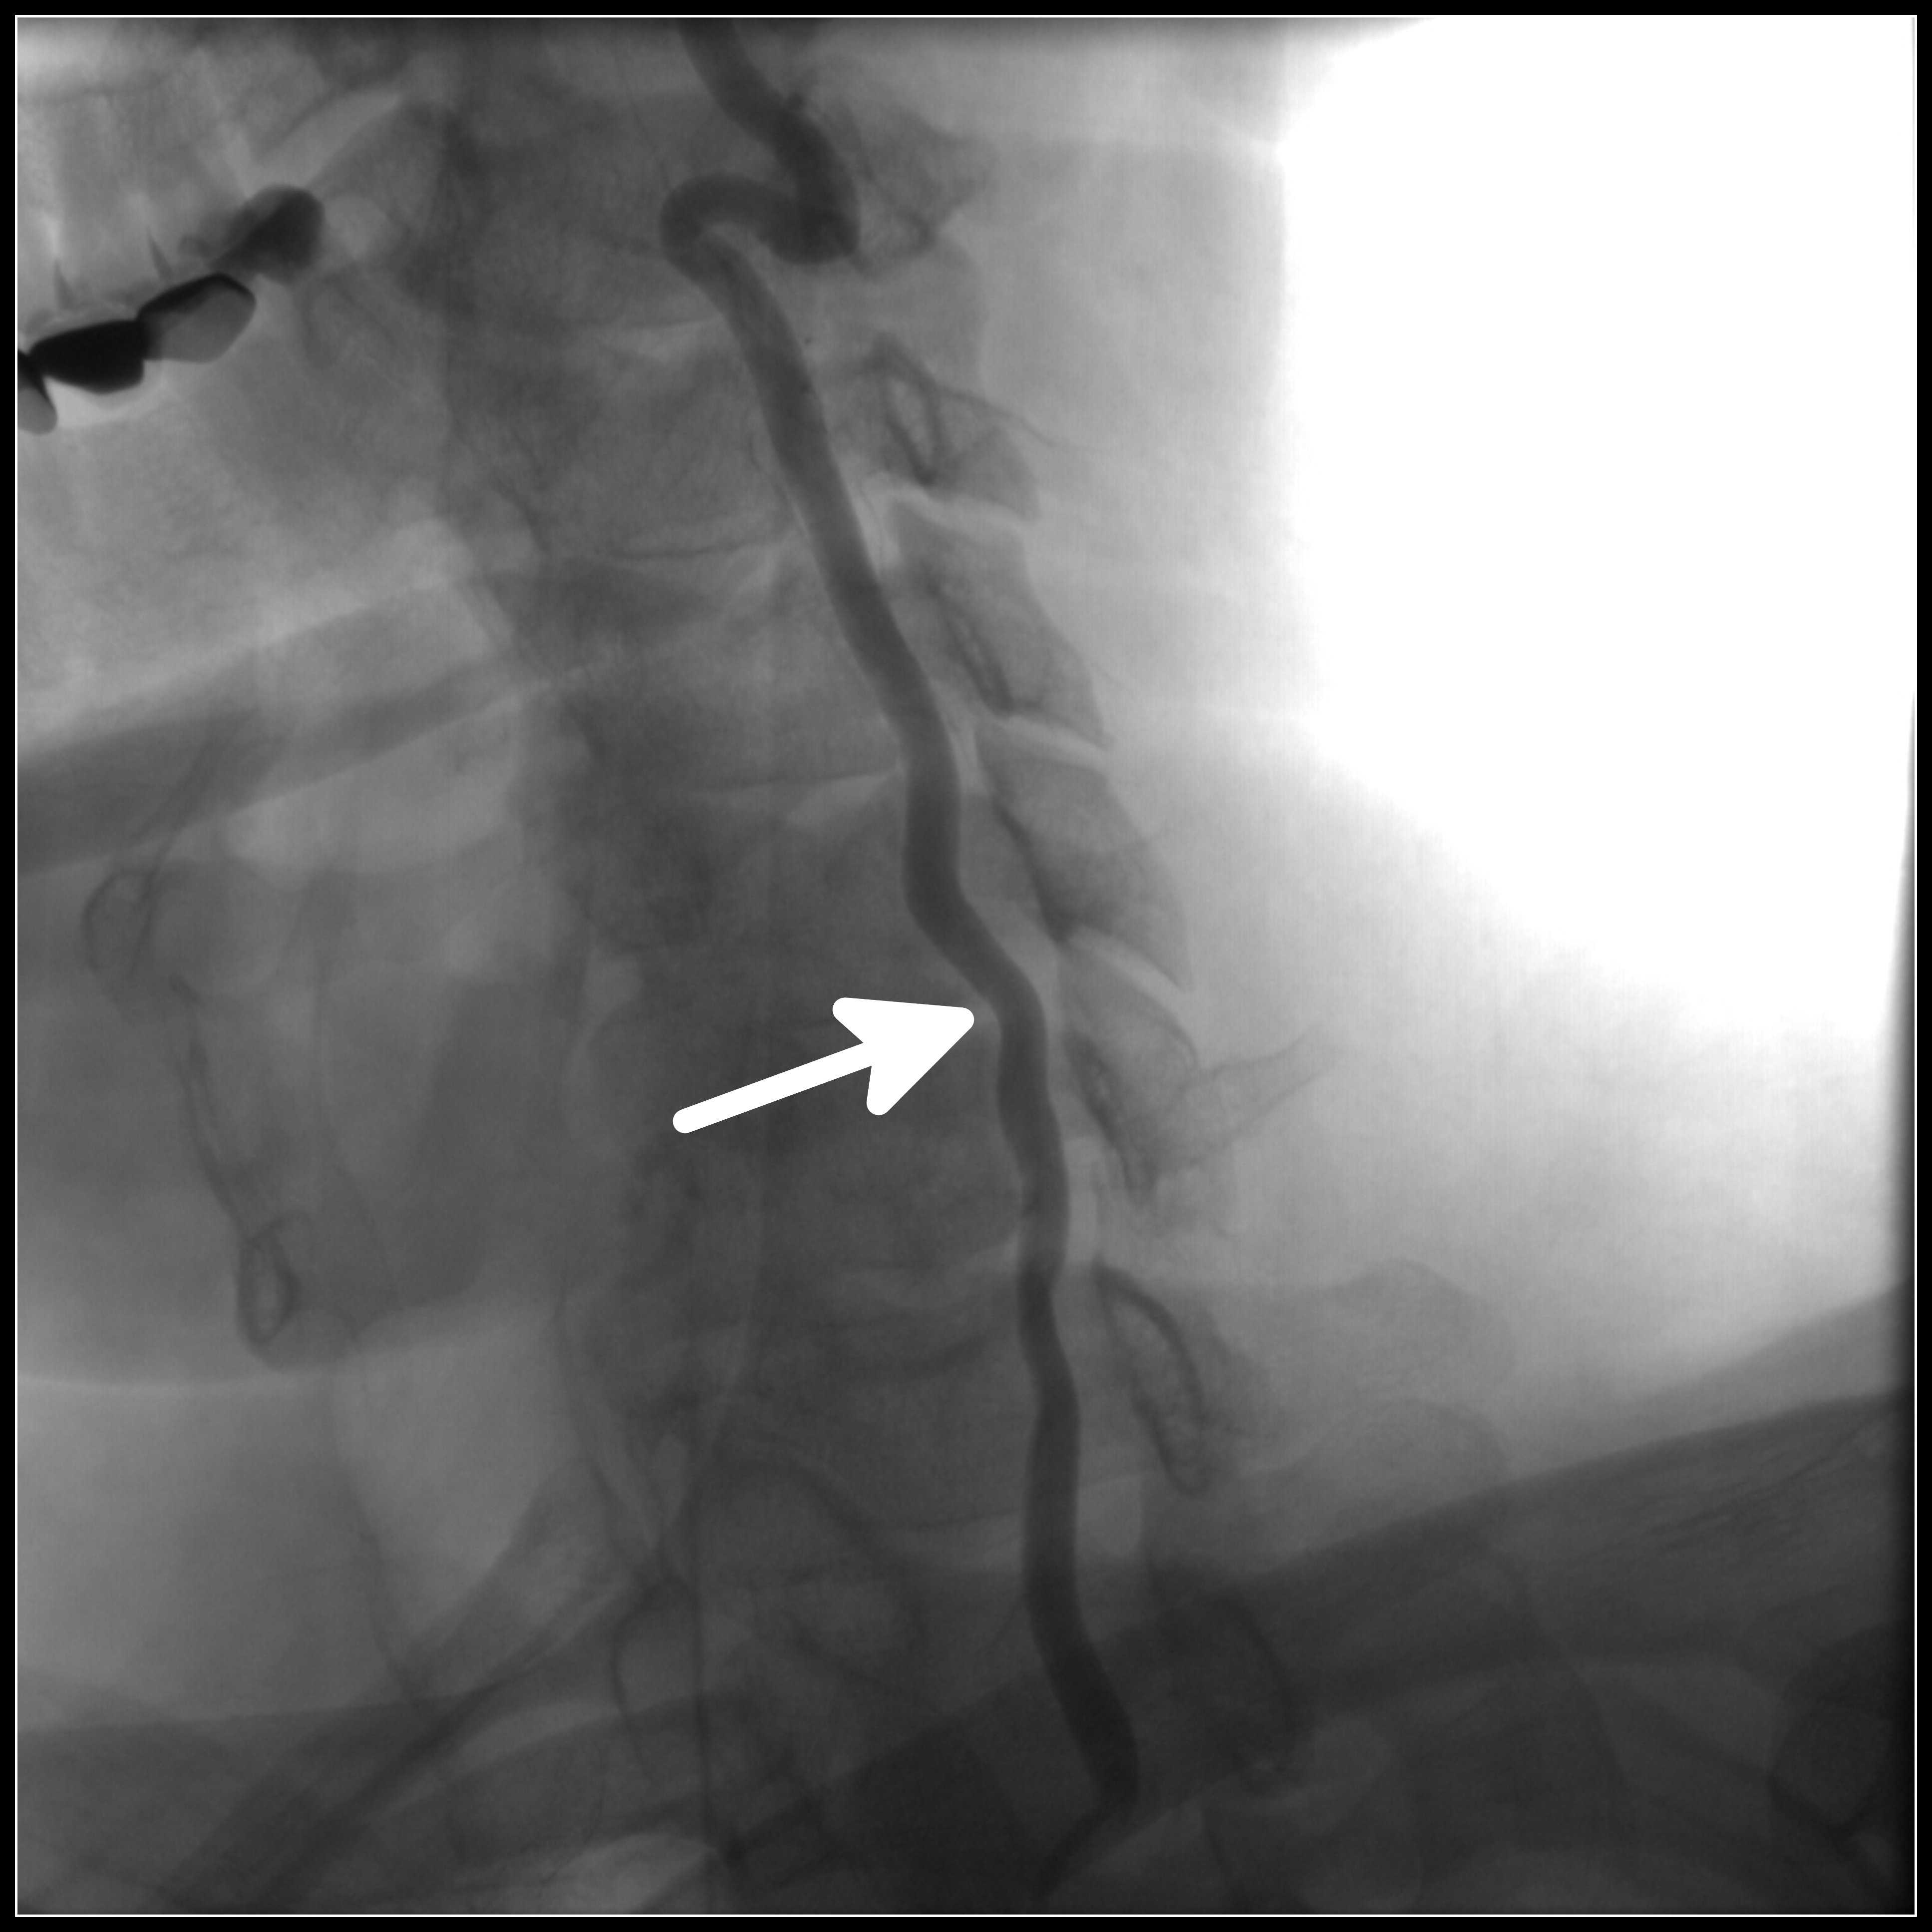 An x-ray of the neck and upper back with an arrow pointing to the vertebral artery, one of the neck’s major arteries.